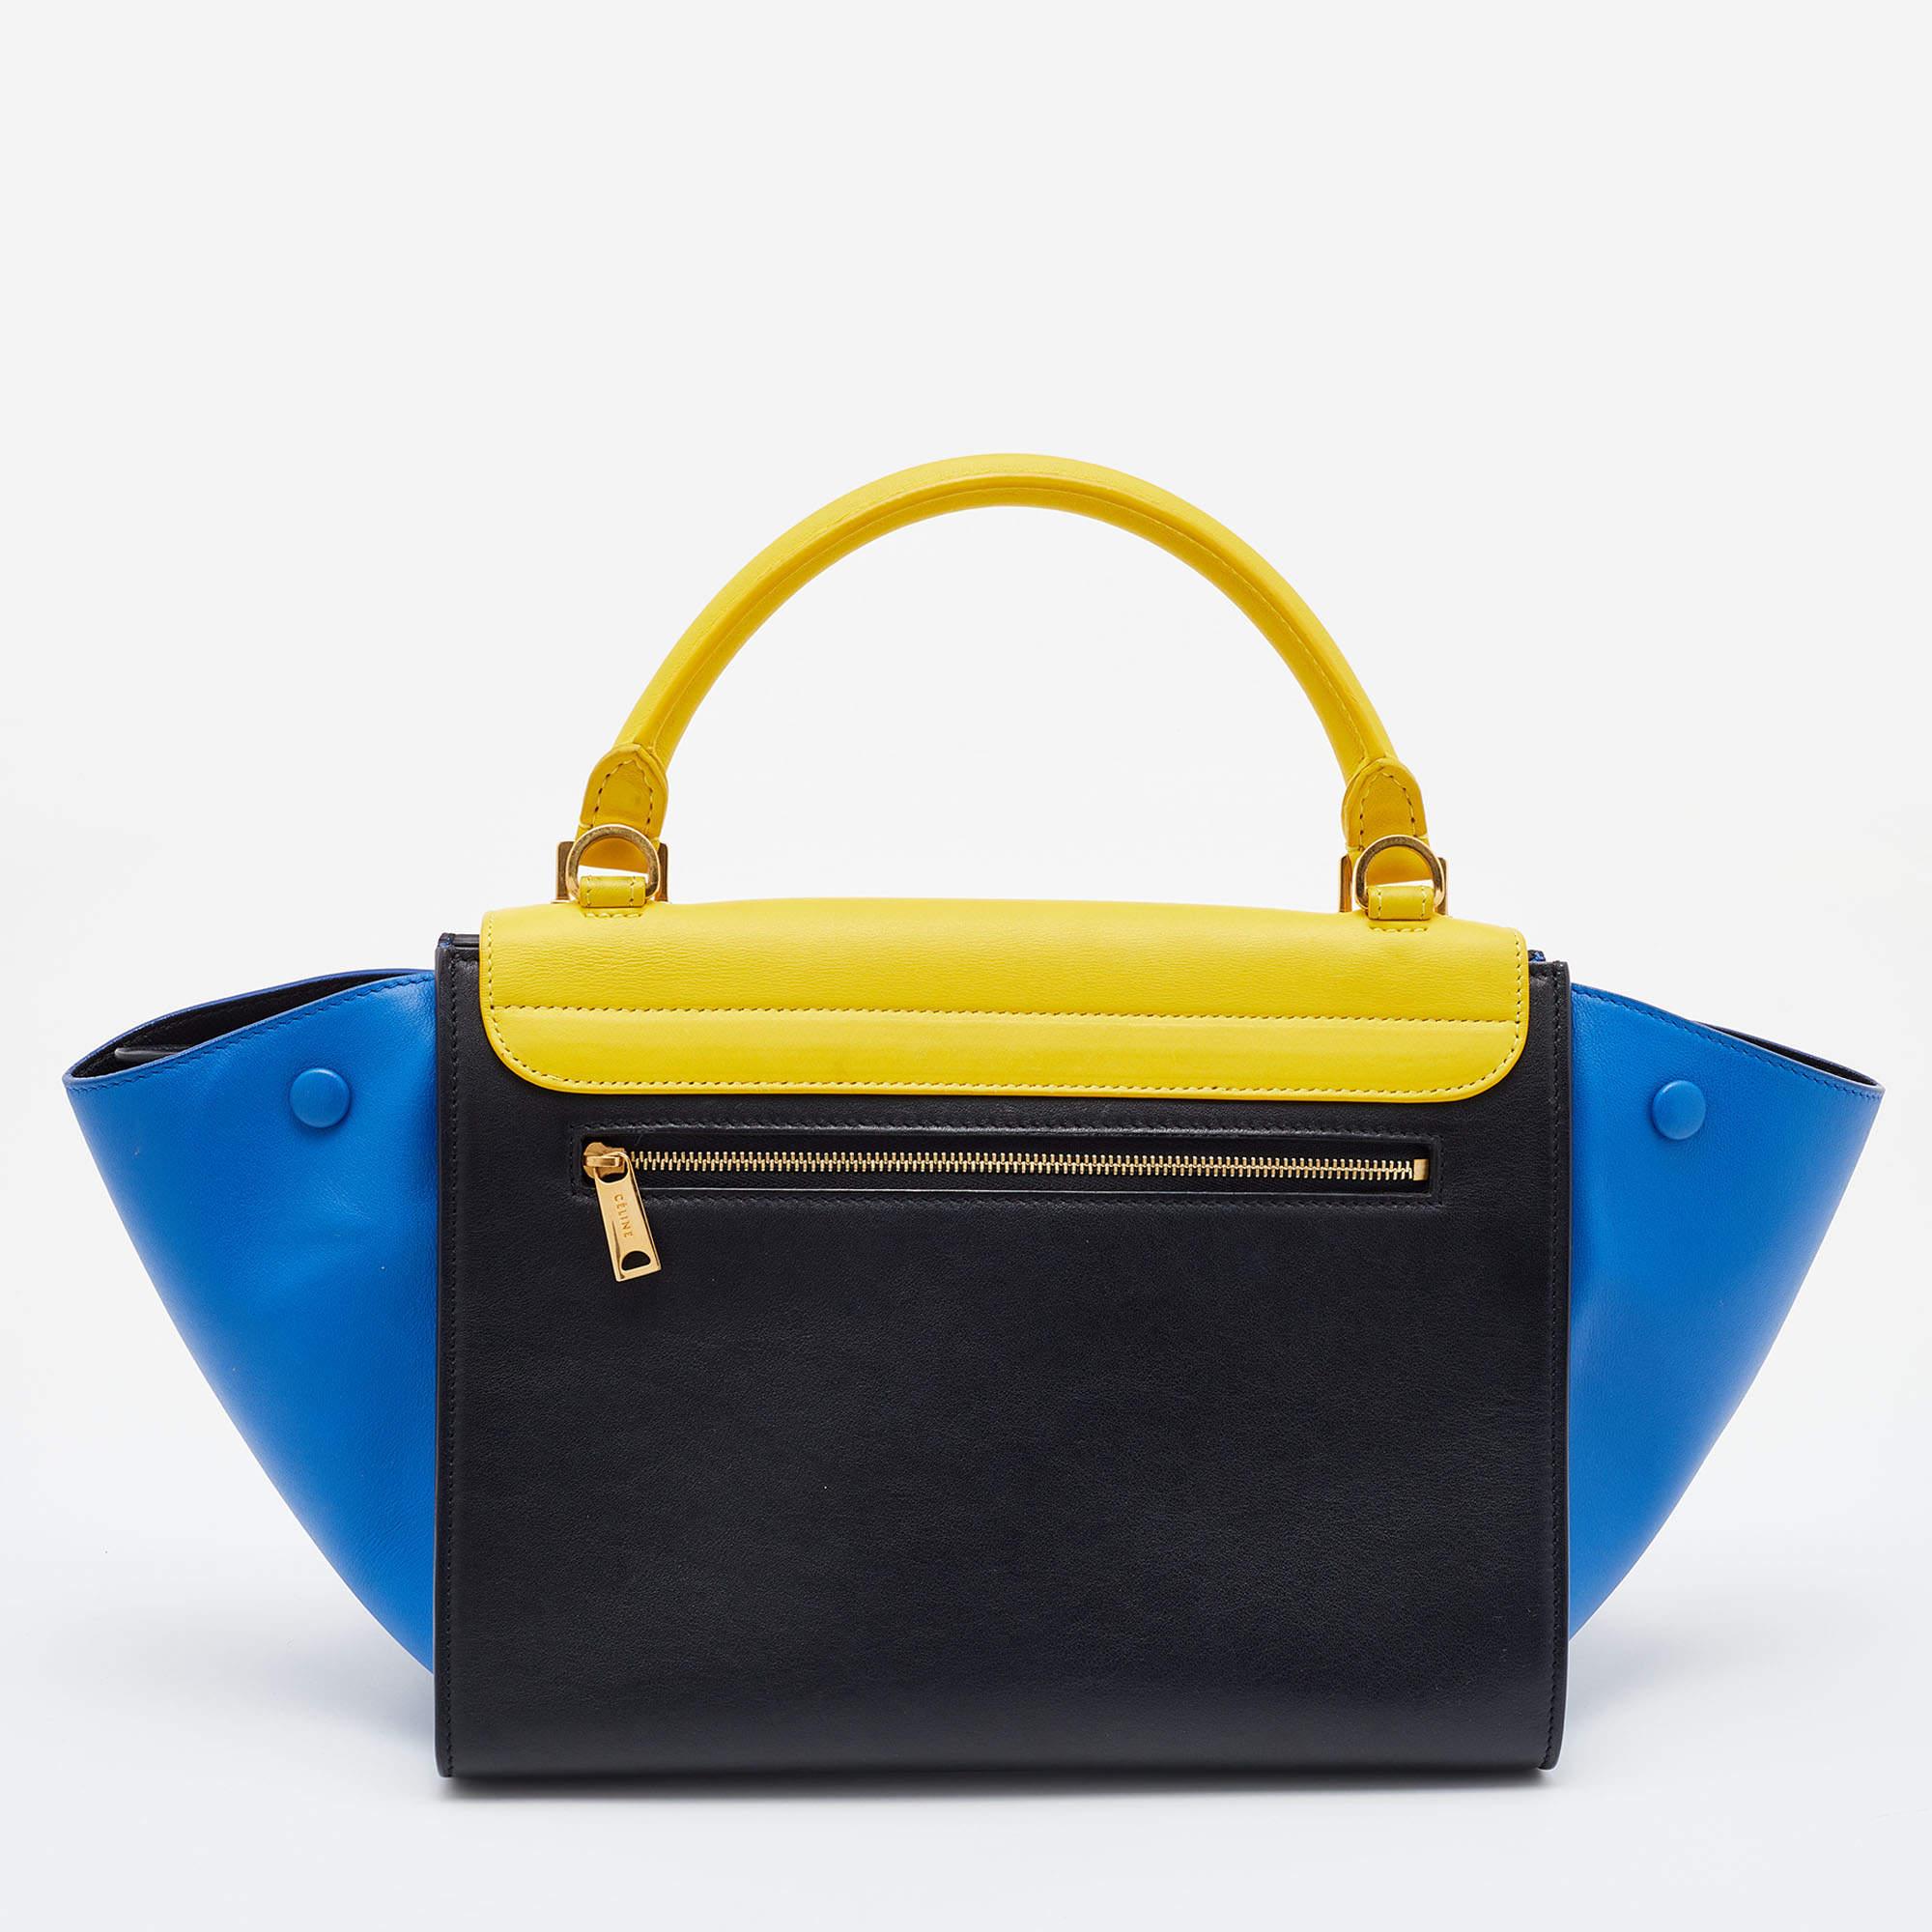 Featuring a simple yet luxurious style, this Celine bag is a thoughtful purchase with its classy aesthetics. Crafted from tri-color leather, it is characterized by flappy wings, gold-tone hardware, and a back zipper pocket. The front flap of this